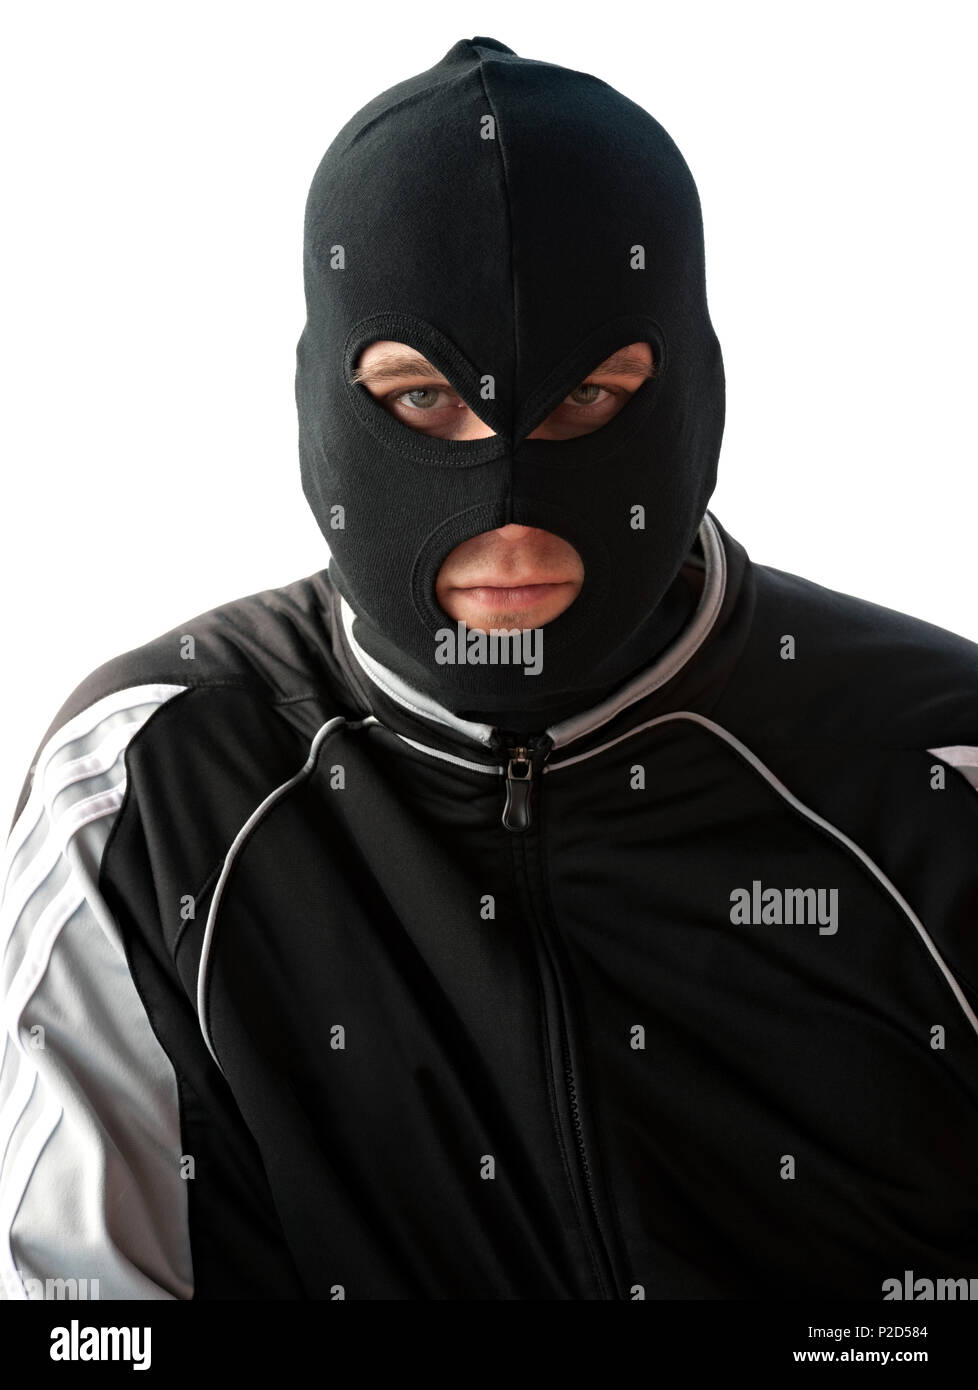 Gangster in mask Stock Photo - Alamy